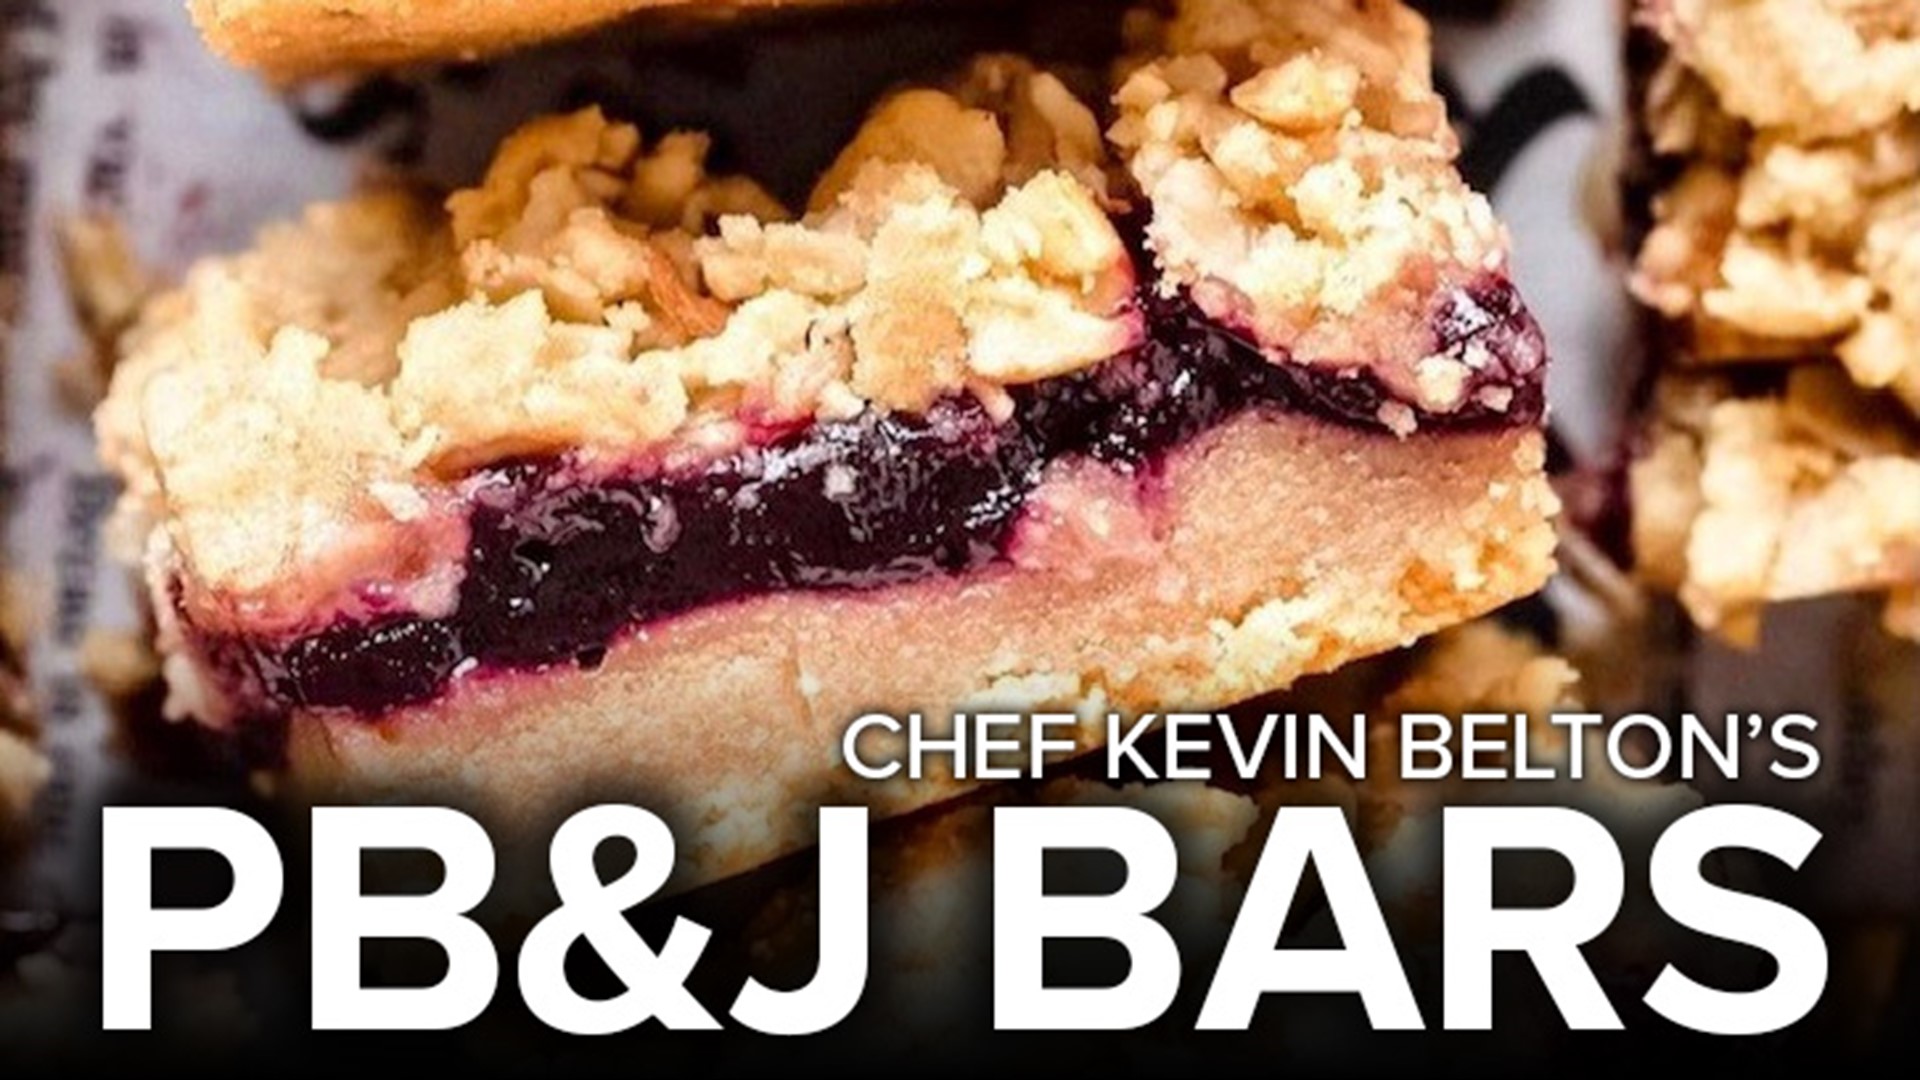 I've loved peanut butter and jelly sandwiches since I was a kid and if you're like me, these PB&J bars will bring out the kid in you!